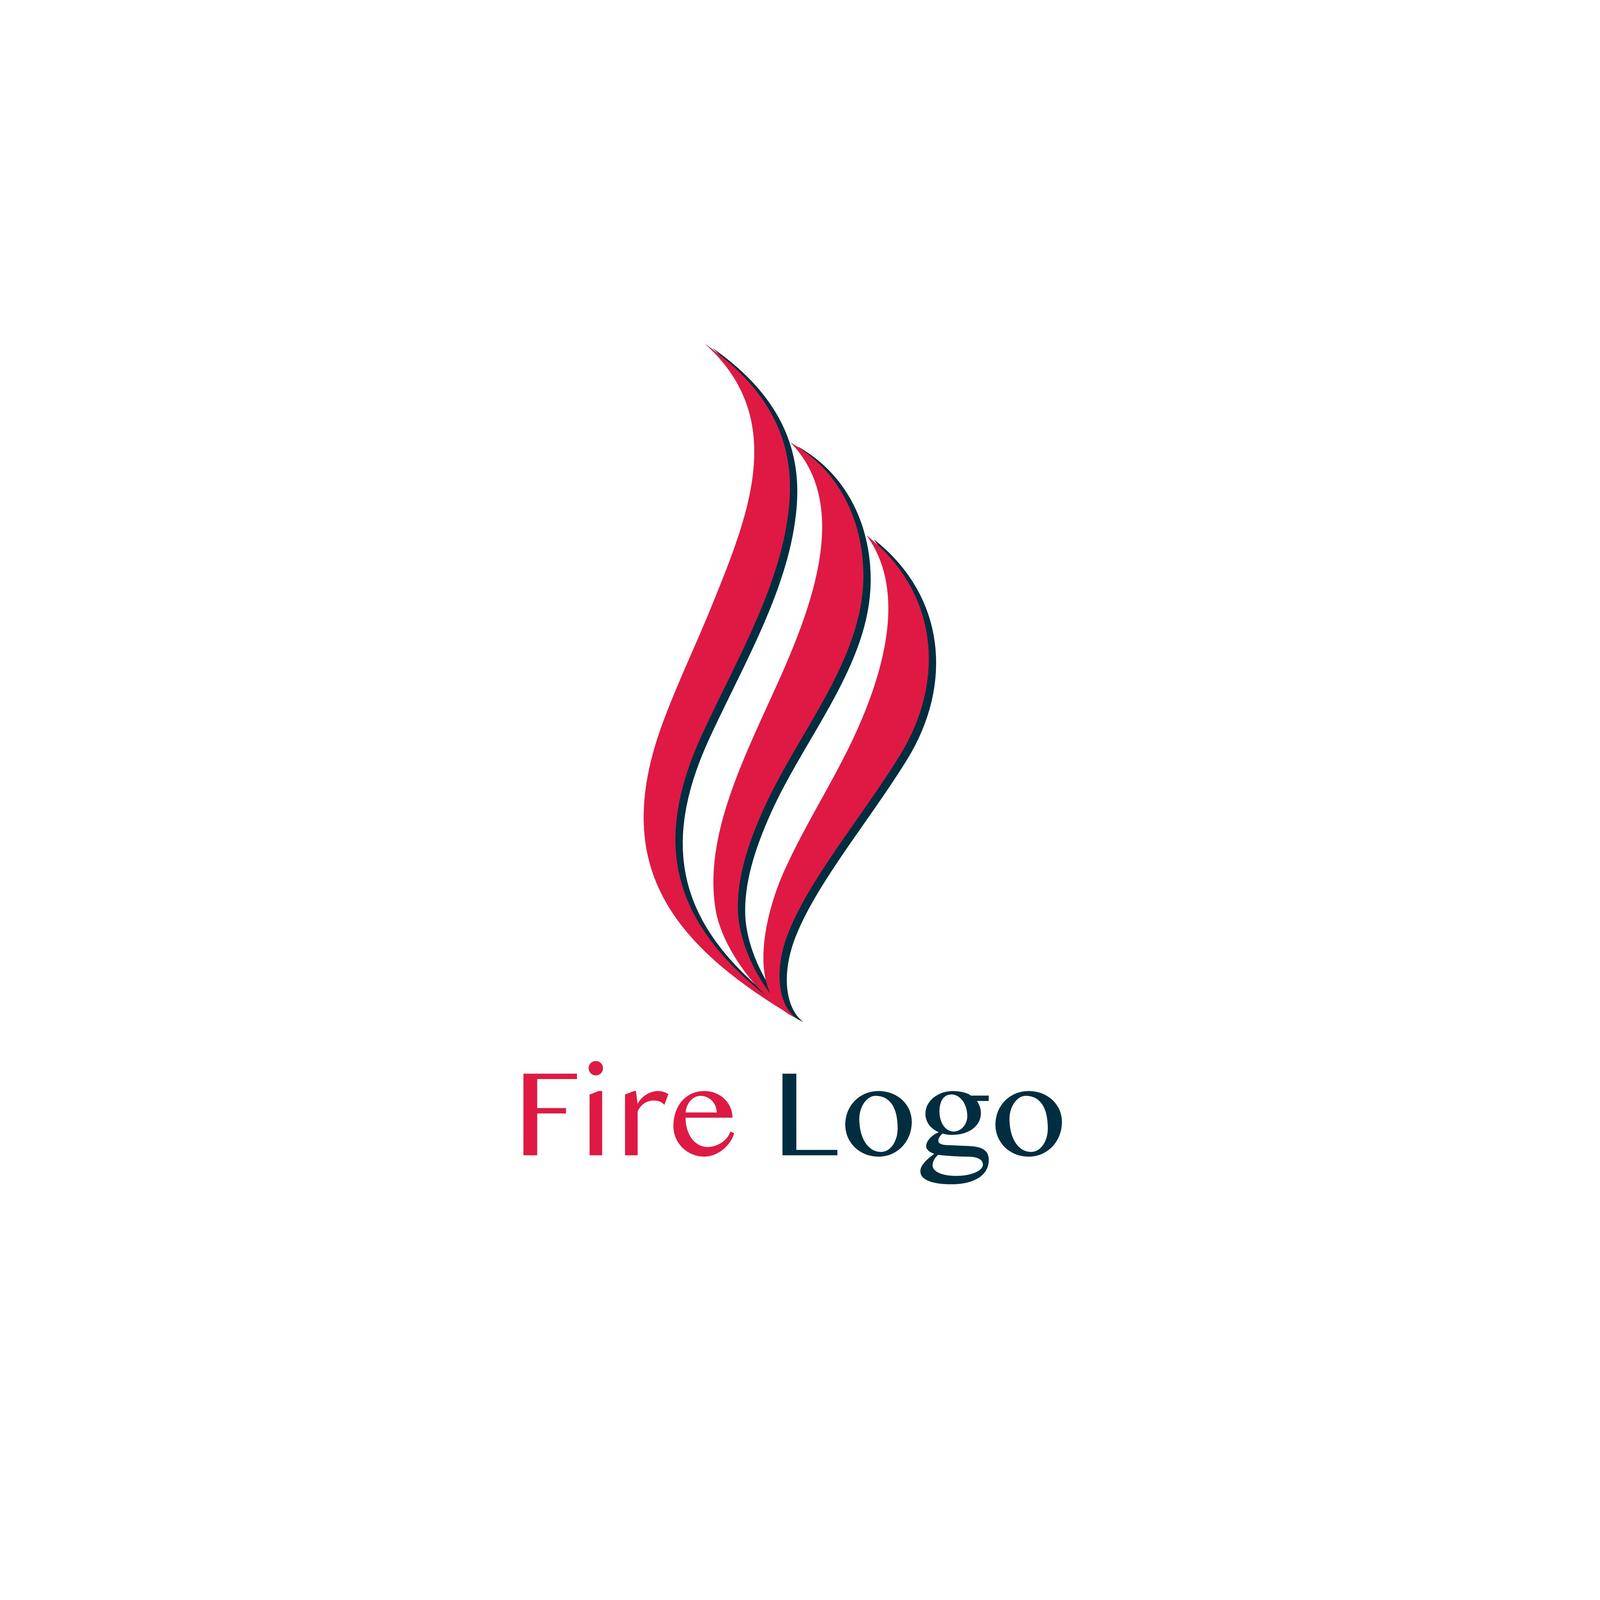 Abstract flame logo design. Creative fire logotype. Vector business icon. Stock Vector illustration isolated